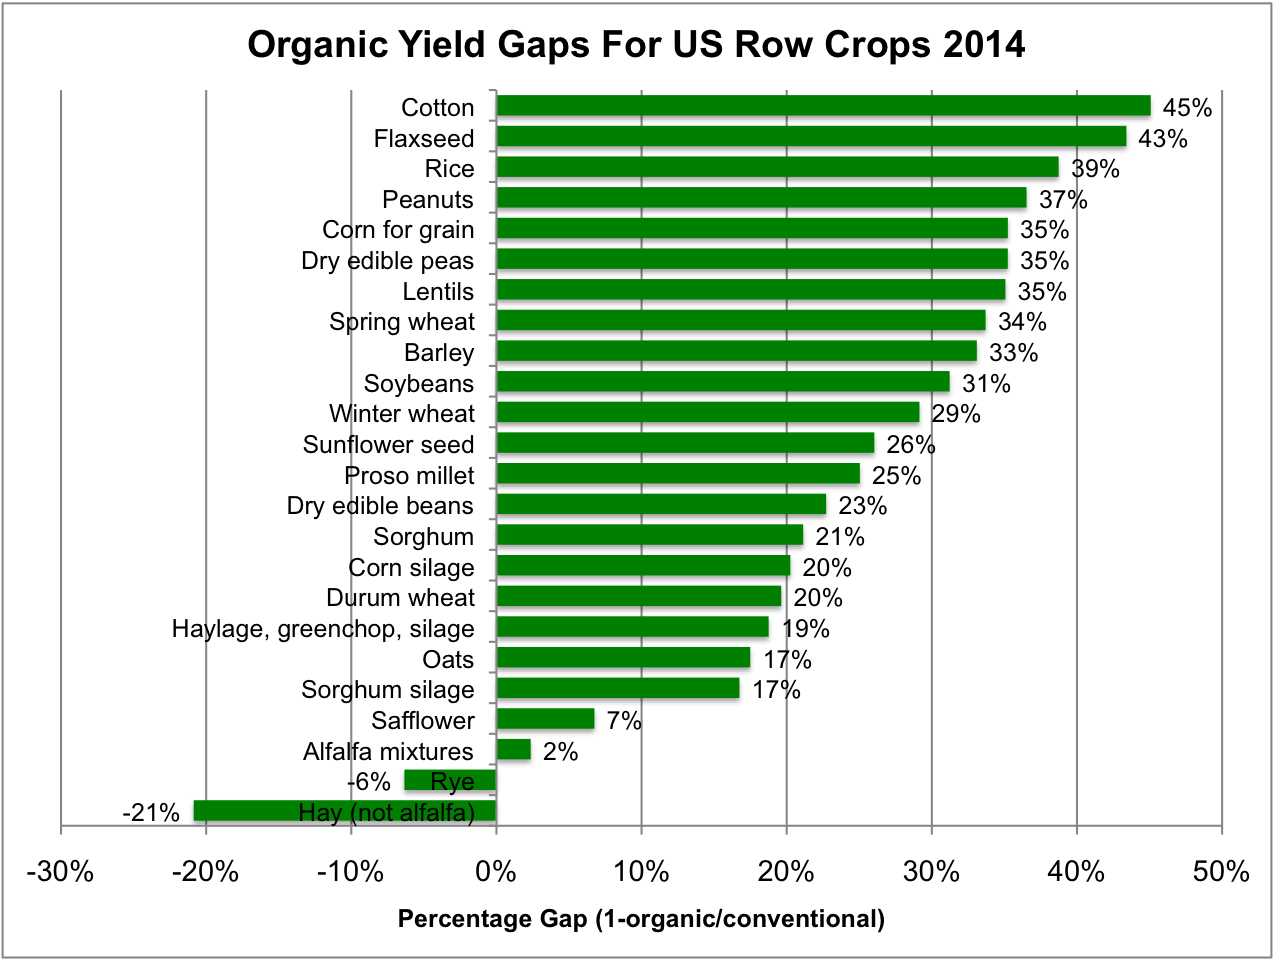 The gaps for row crops